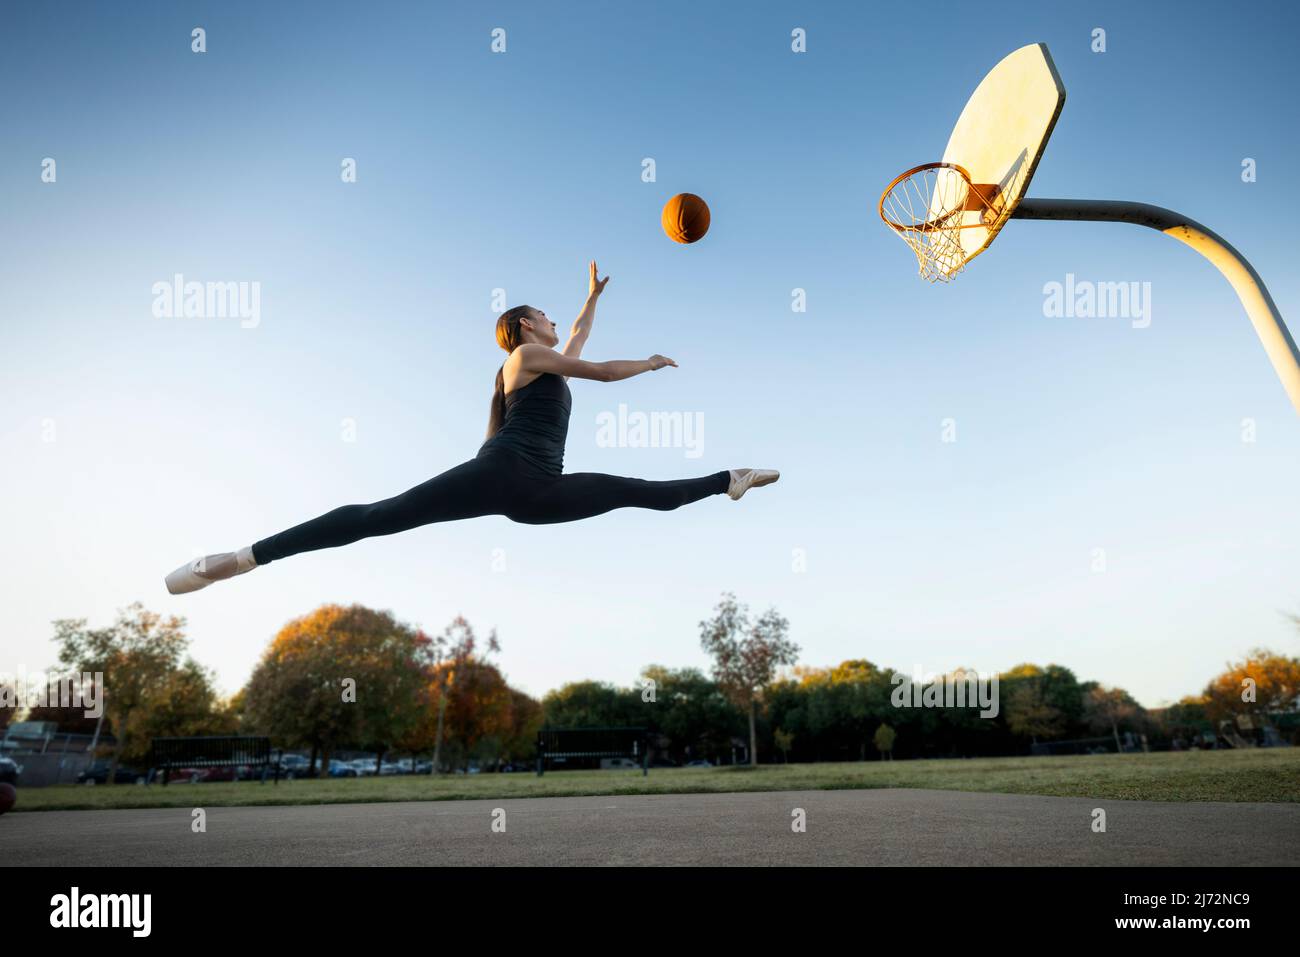 Female ballet dancer jumping and shooting baskets on an outdoor Basketball court Stock Photo